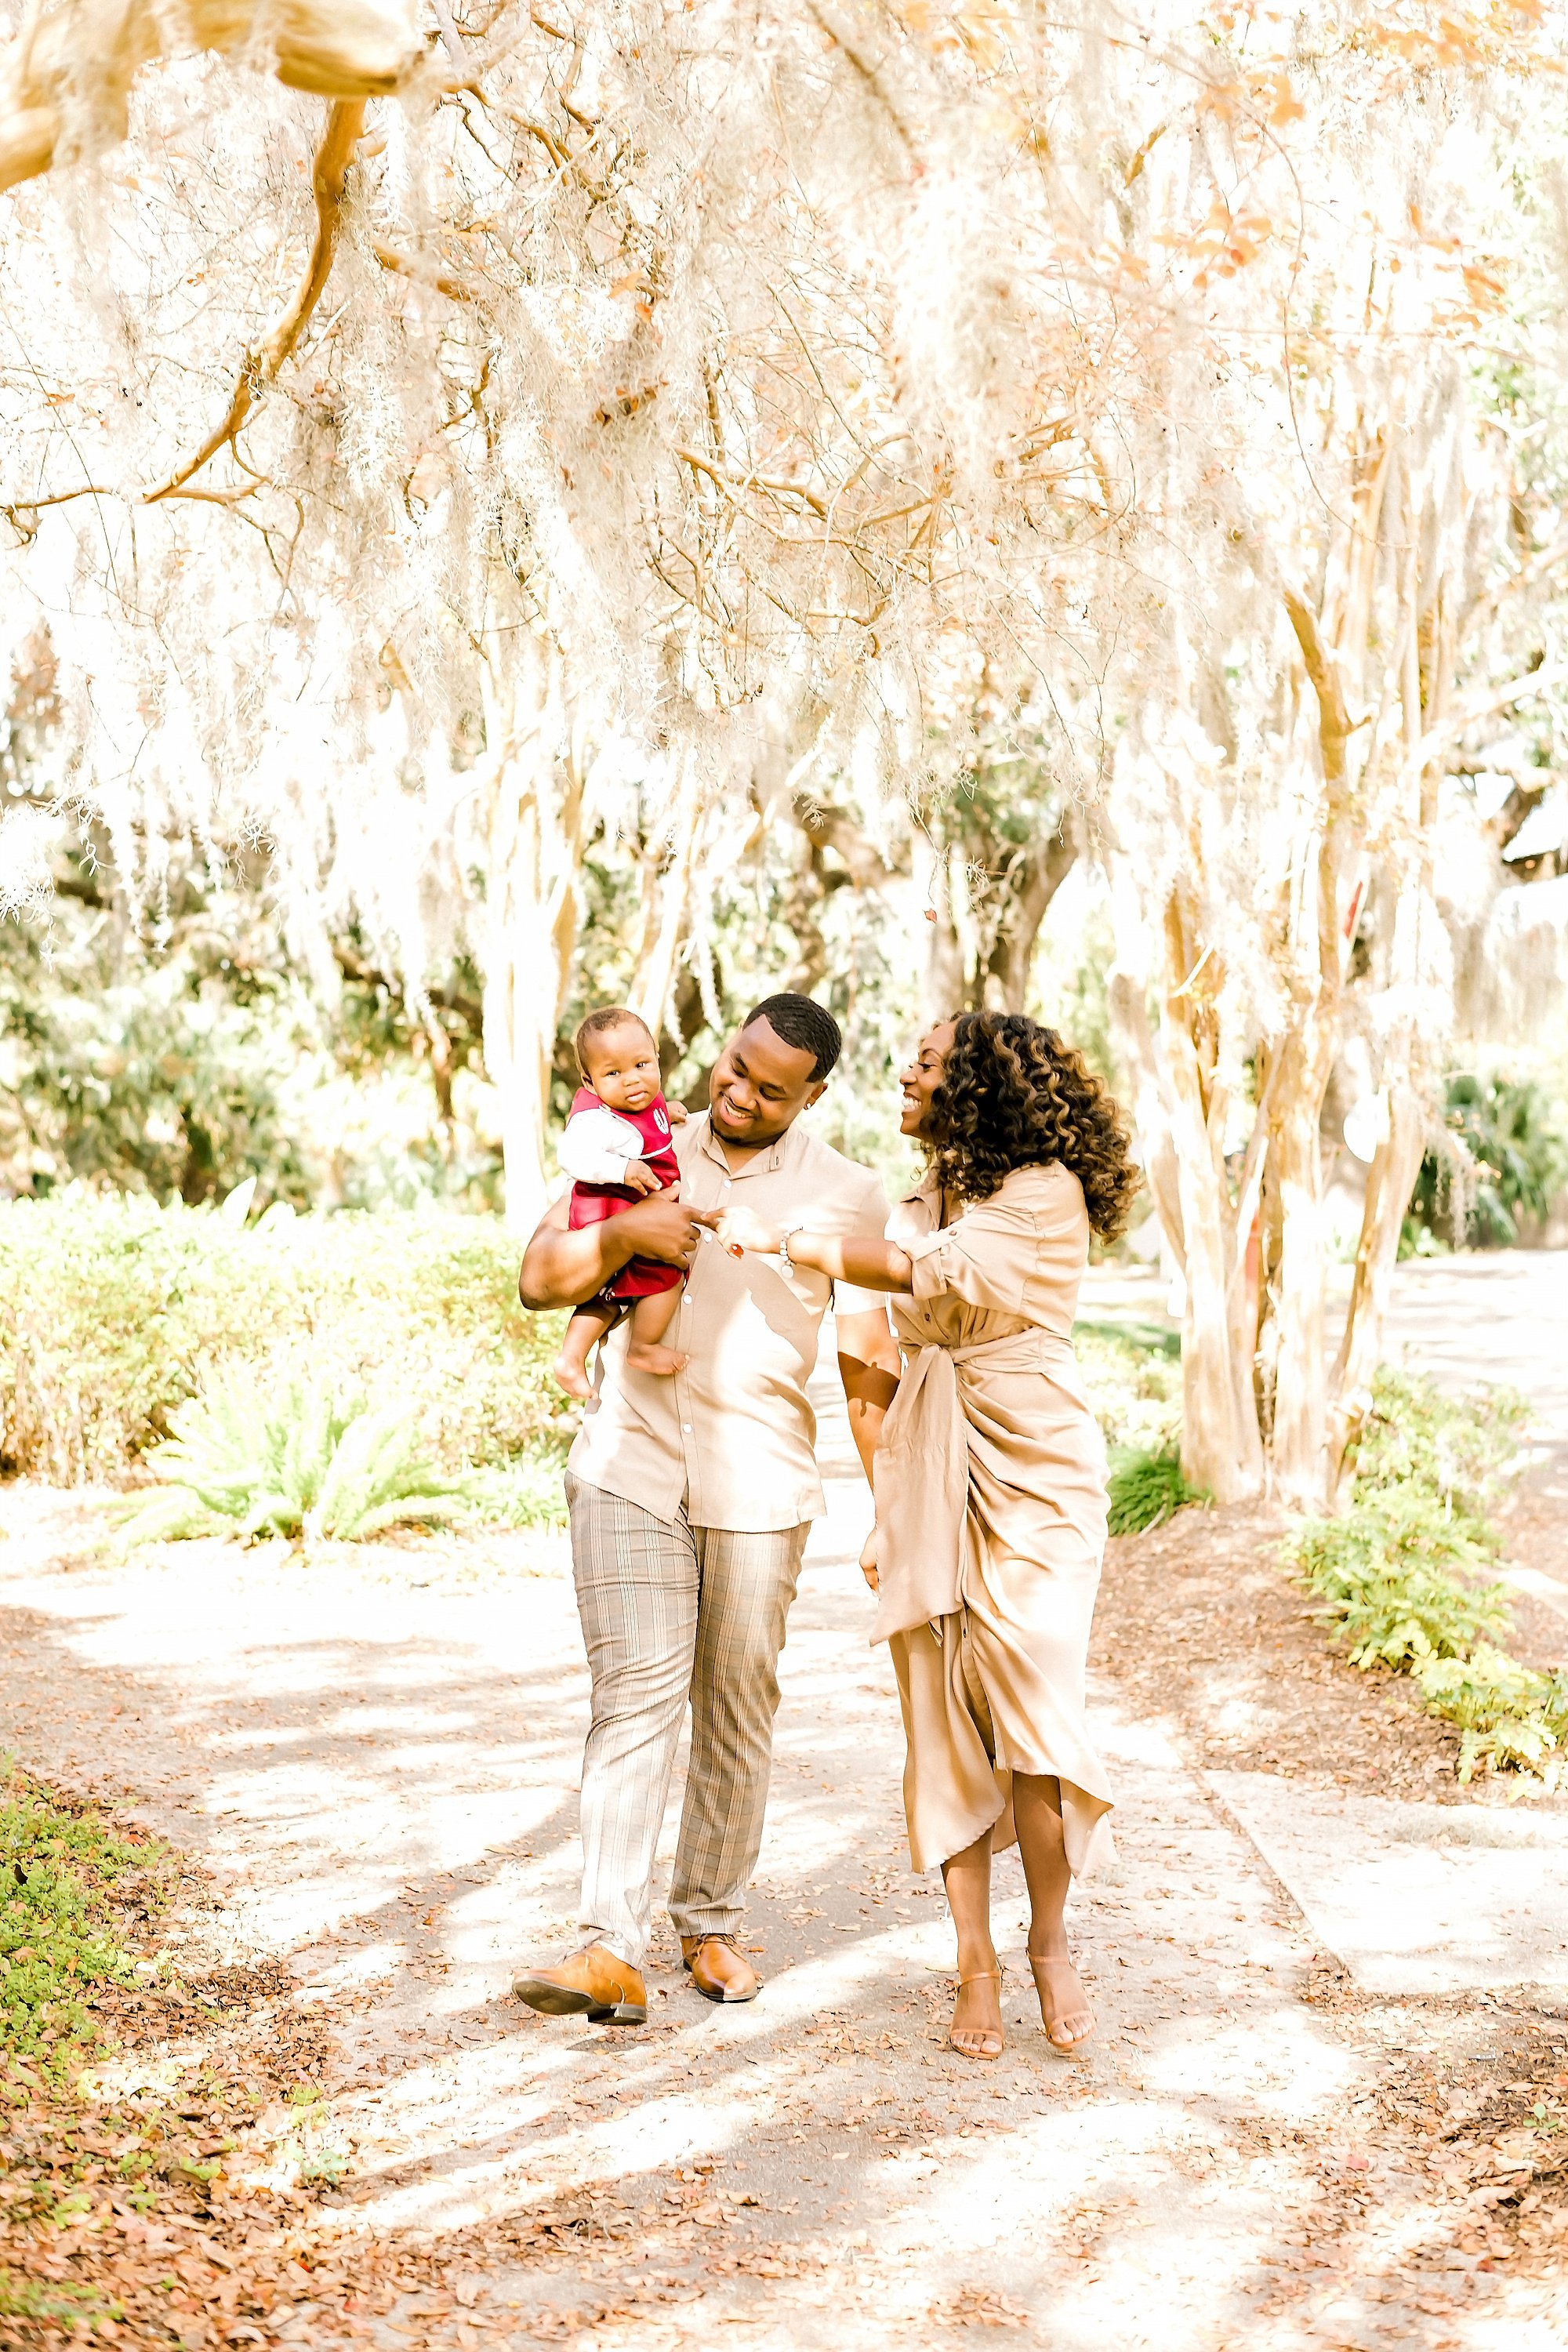 French Quarter Engagement Shoot-New Orleans French Quarter-New Orleans Photographer_0710.jpg